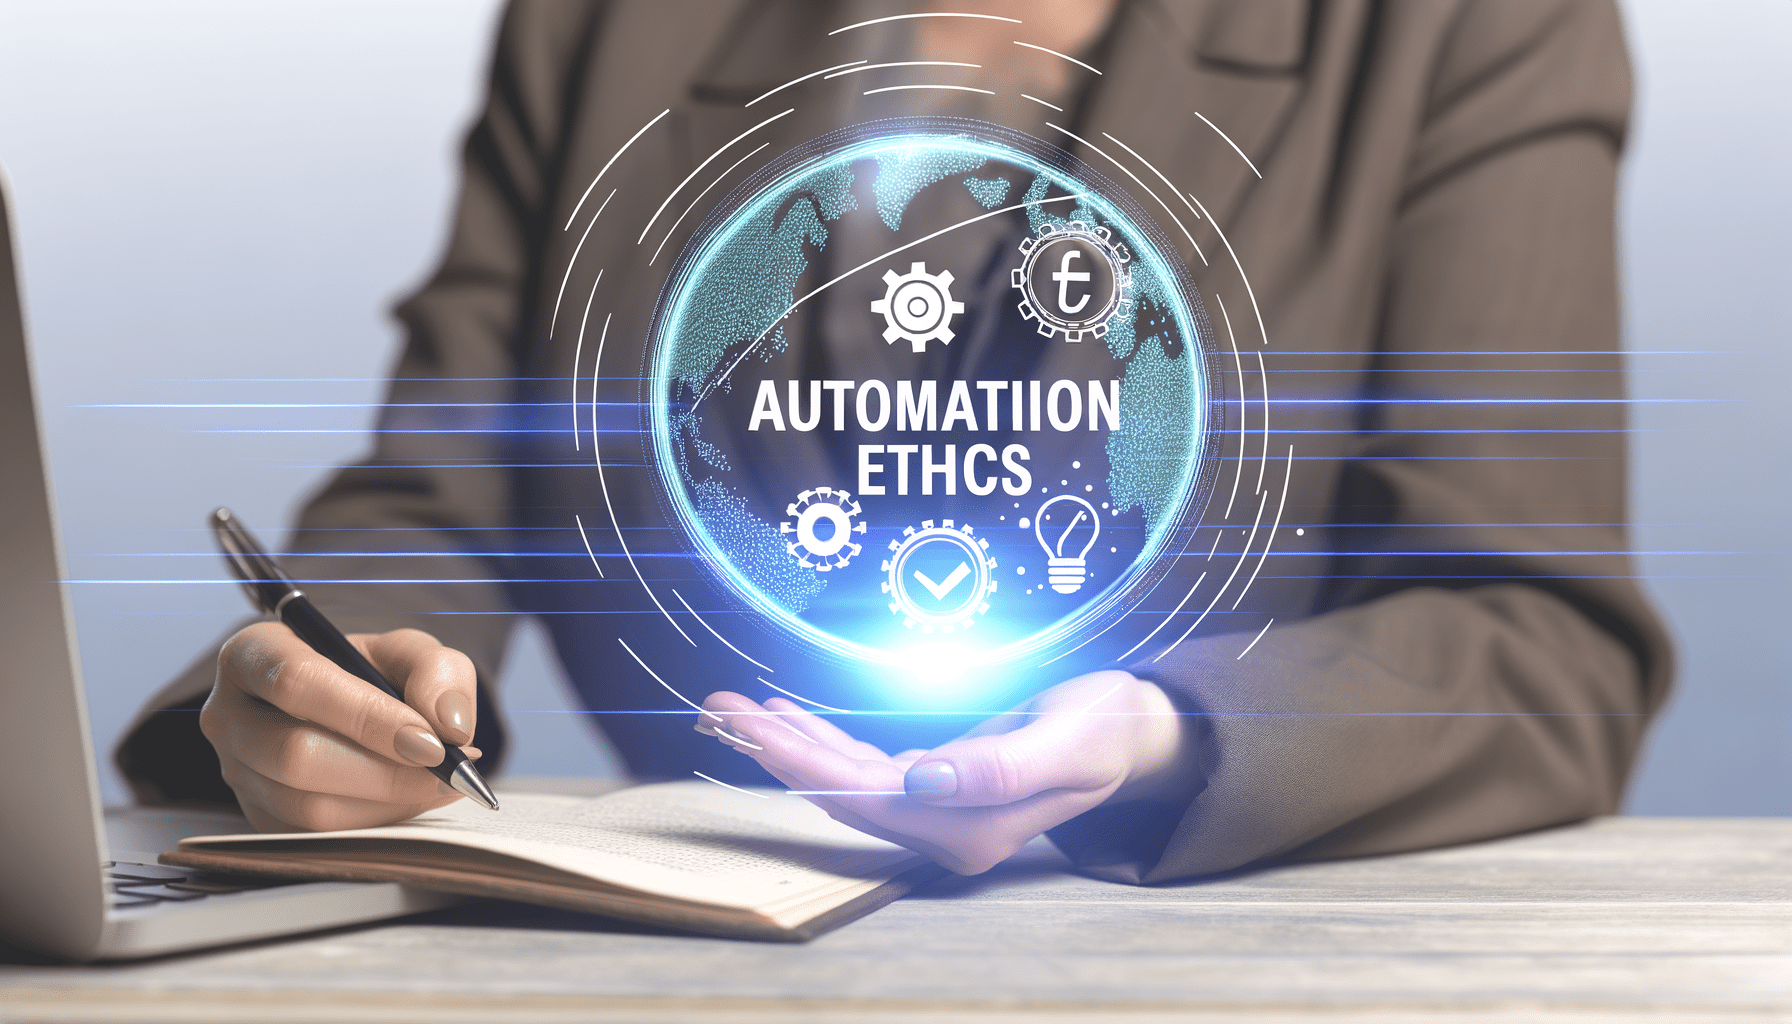 The Ethics of Automation in the Workplace